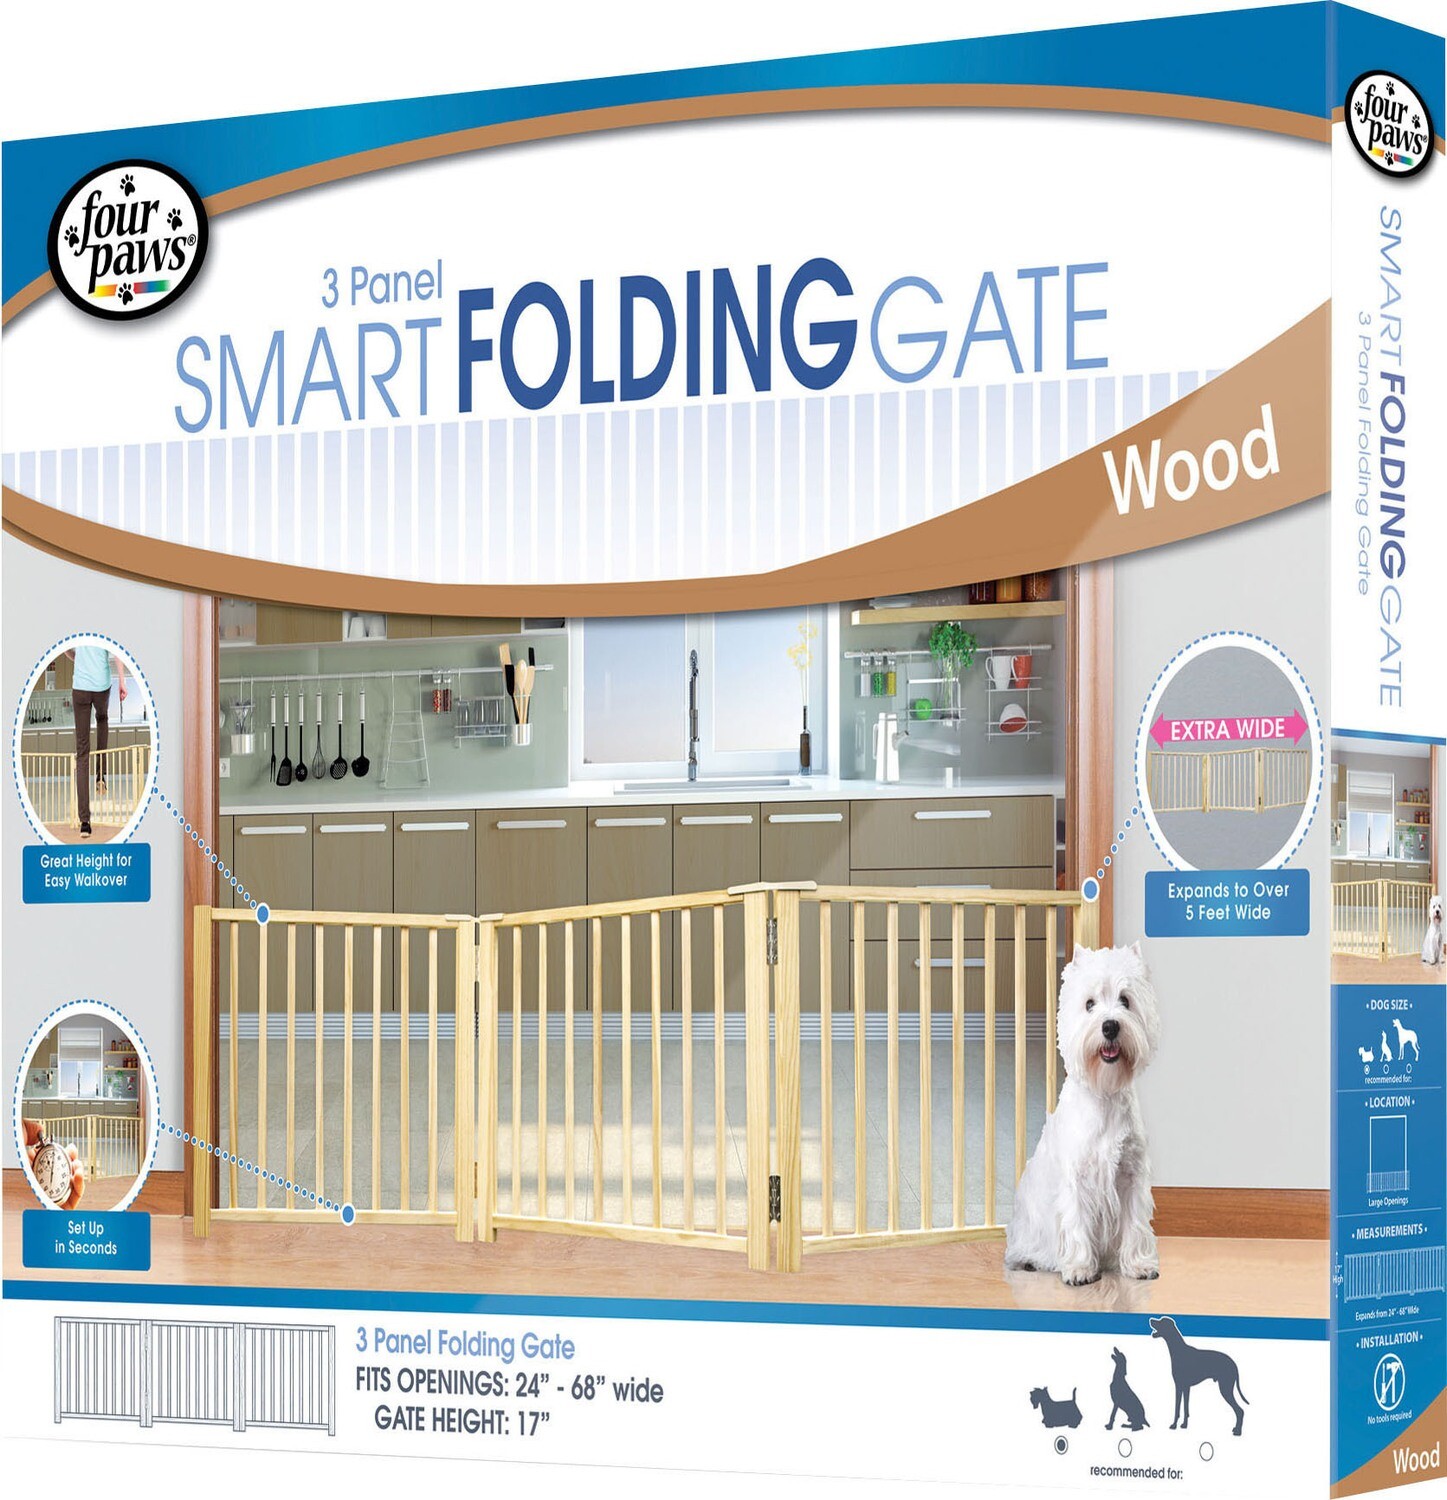 FP GATE WOOD FREE STANDING 3 PANEL 24-68" X 17 H